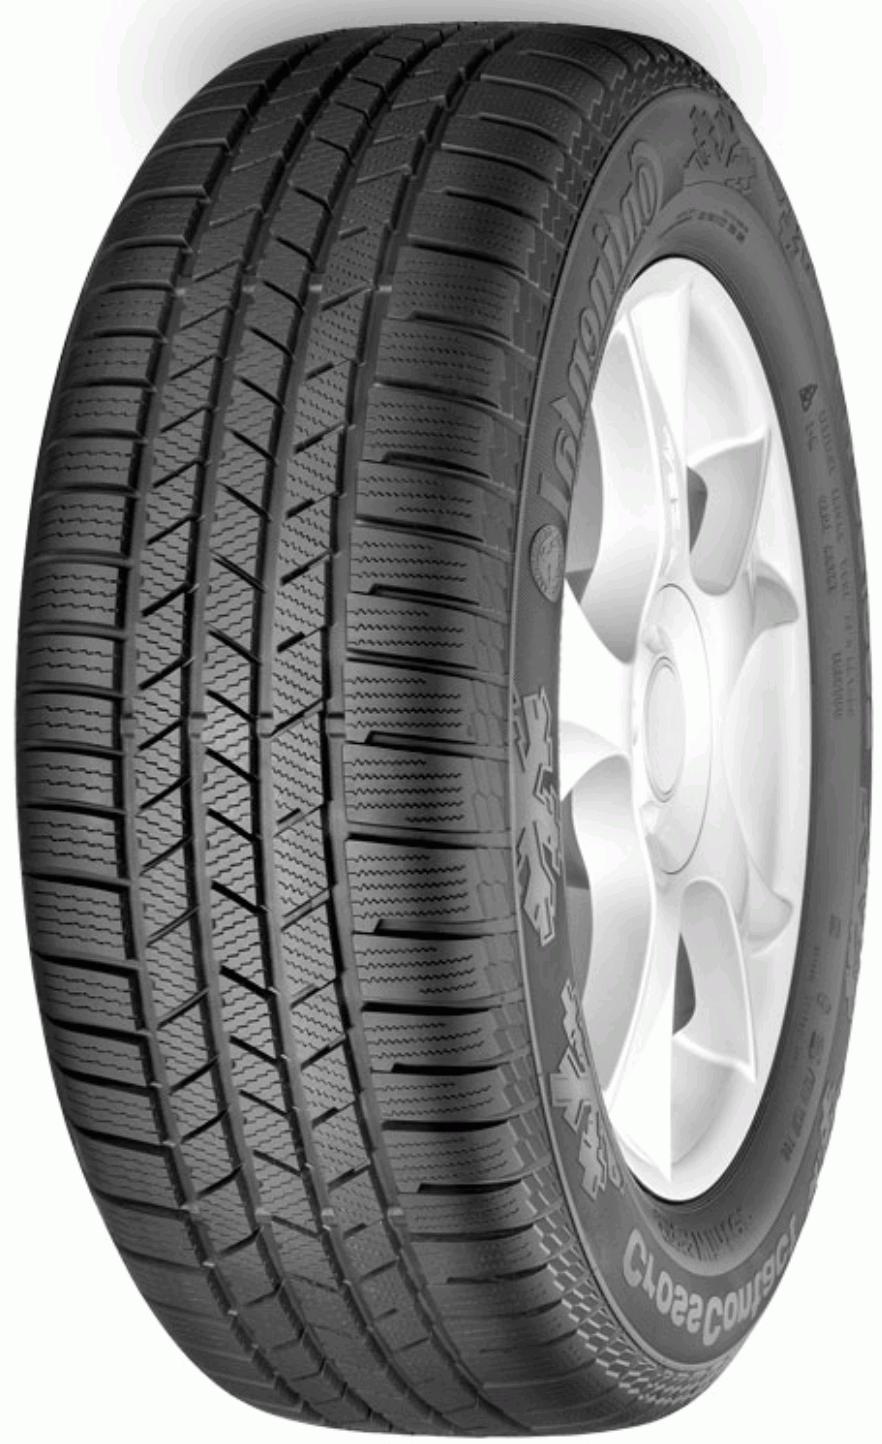 Continental ContiCrossContact Winter - Tire Reviews Tests and